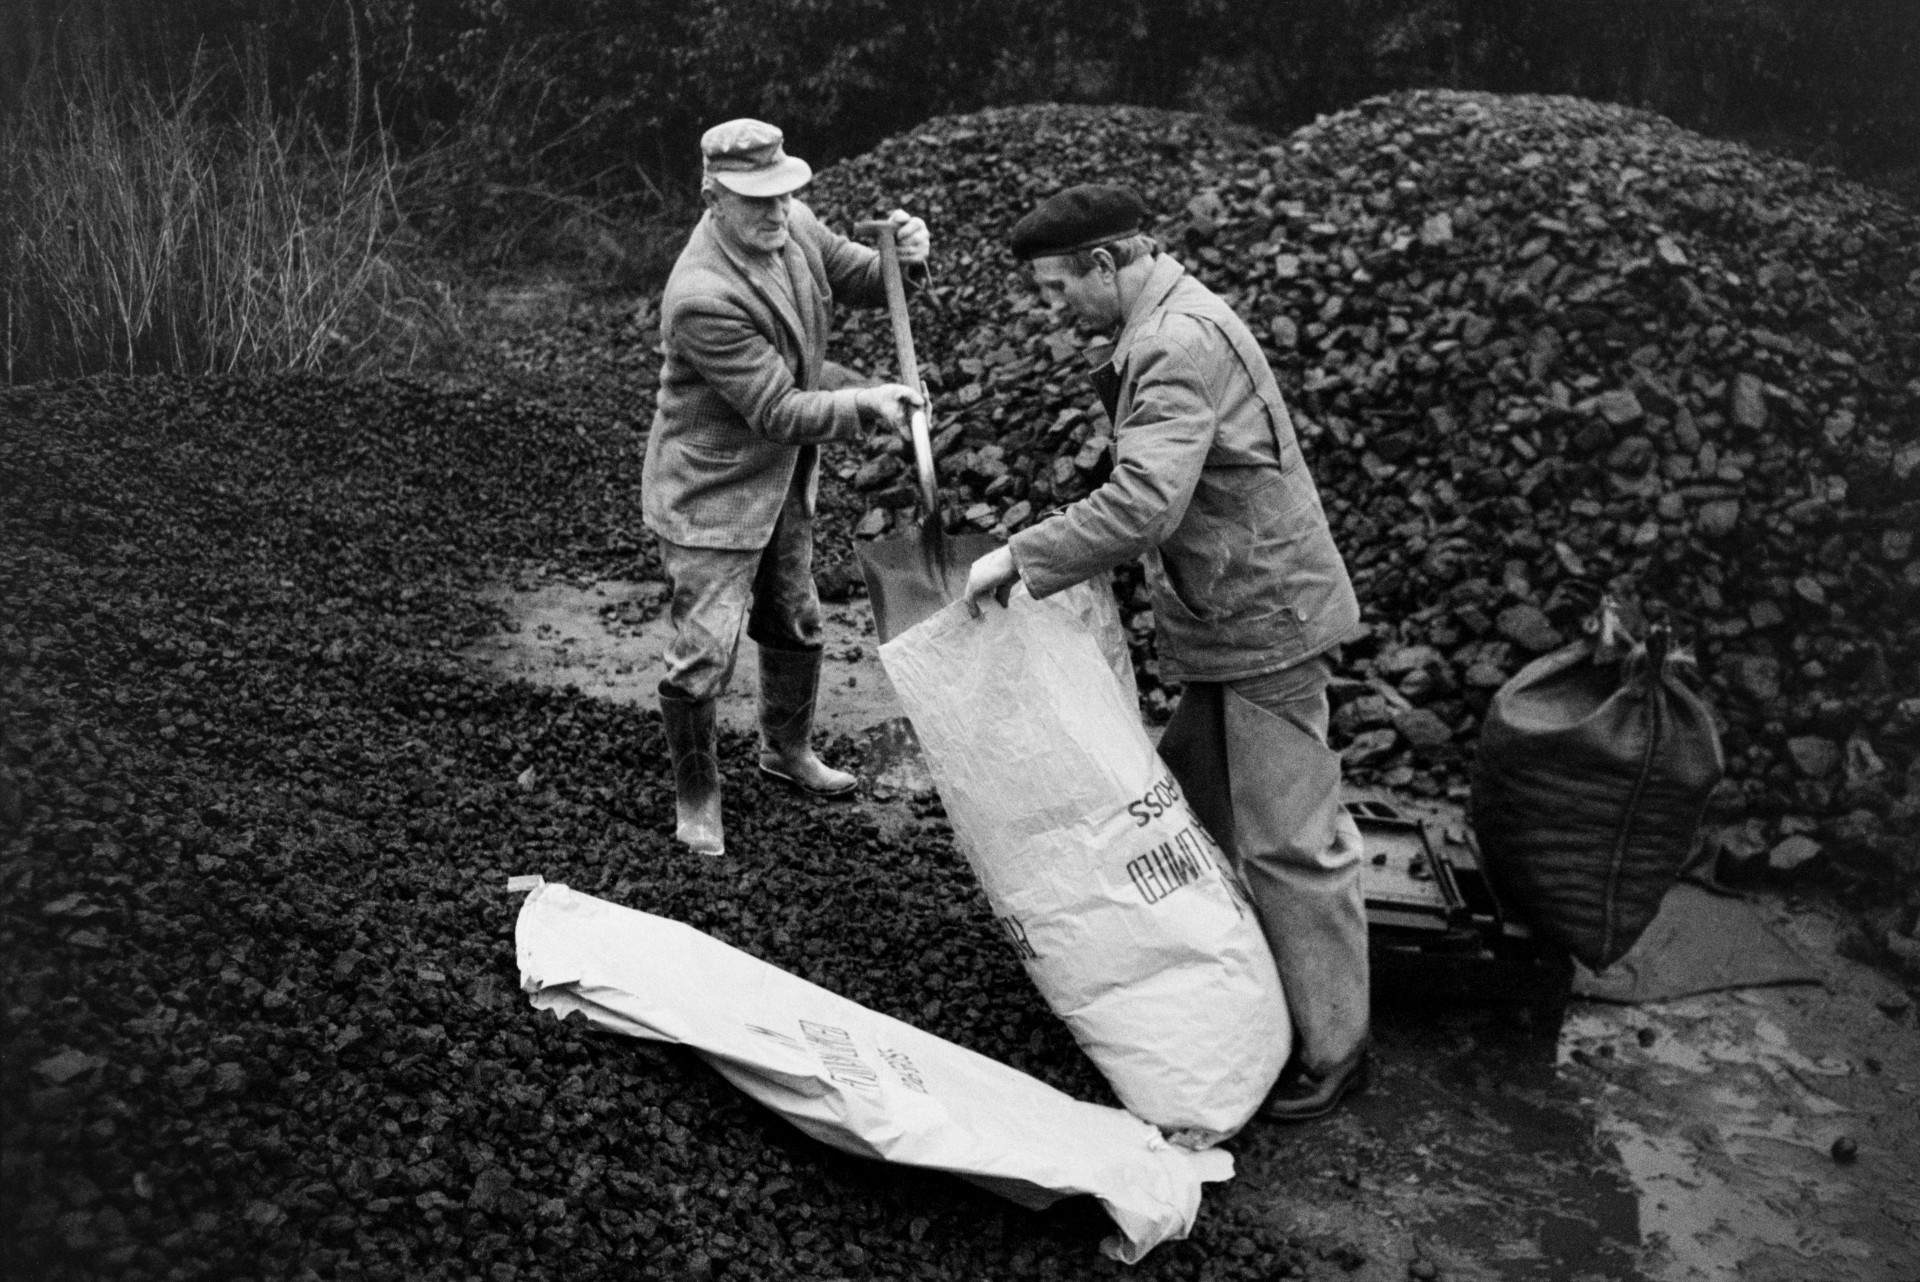 Ivor Bourne collecting coal from a coal merchant near Dolton Beacon. He is holding a sack open while another man shovels coal into it from a large mound.